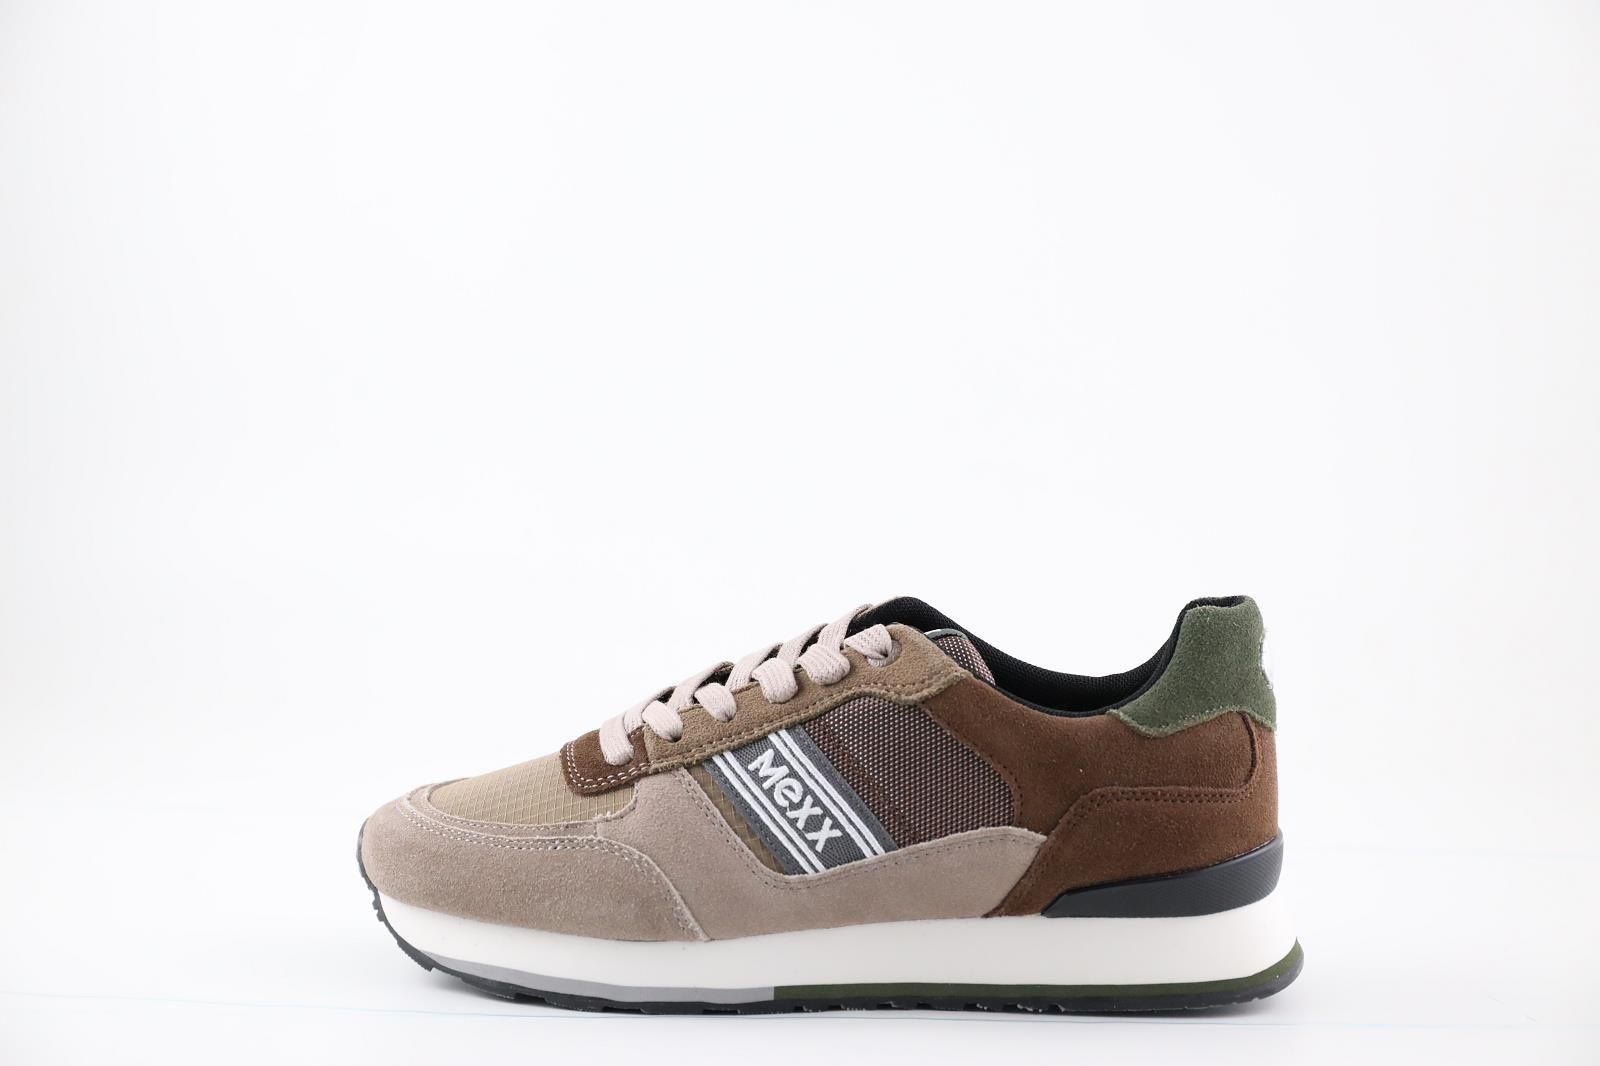 Mexx Sneackers Taupe/Brun hommes (Hoover - MXWM000901M) - Marques à Suivre